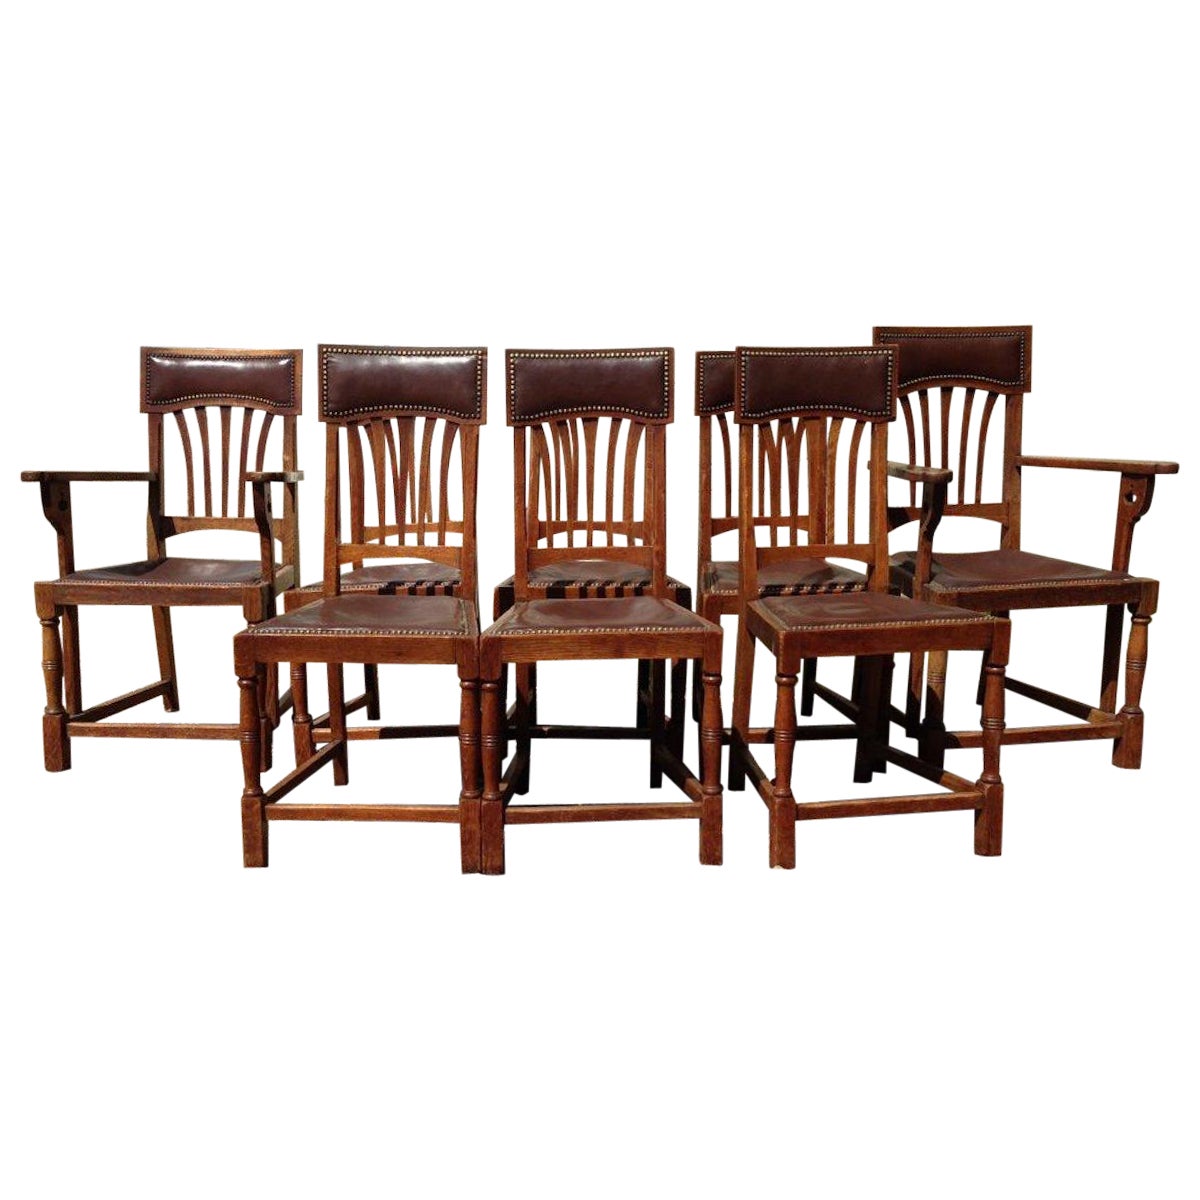 Shapland & Petter Attri a Set of Eight English Arts & Crafts Oak Dining Chairs